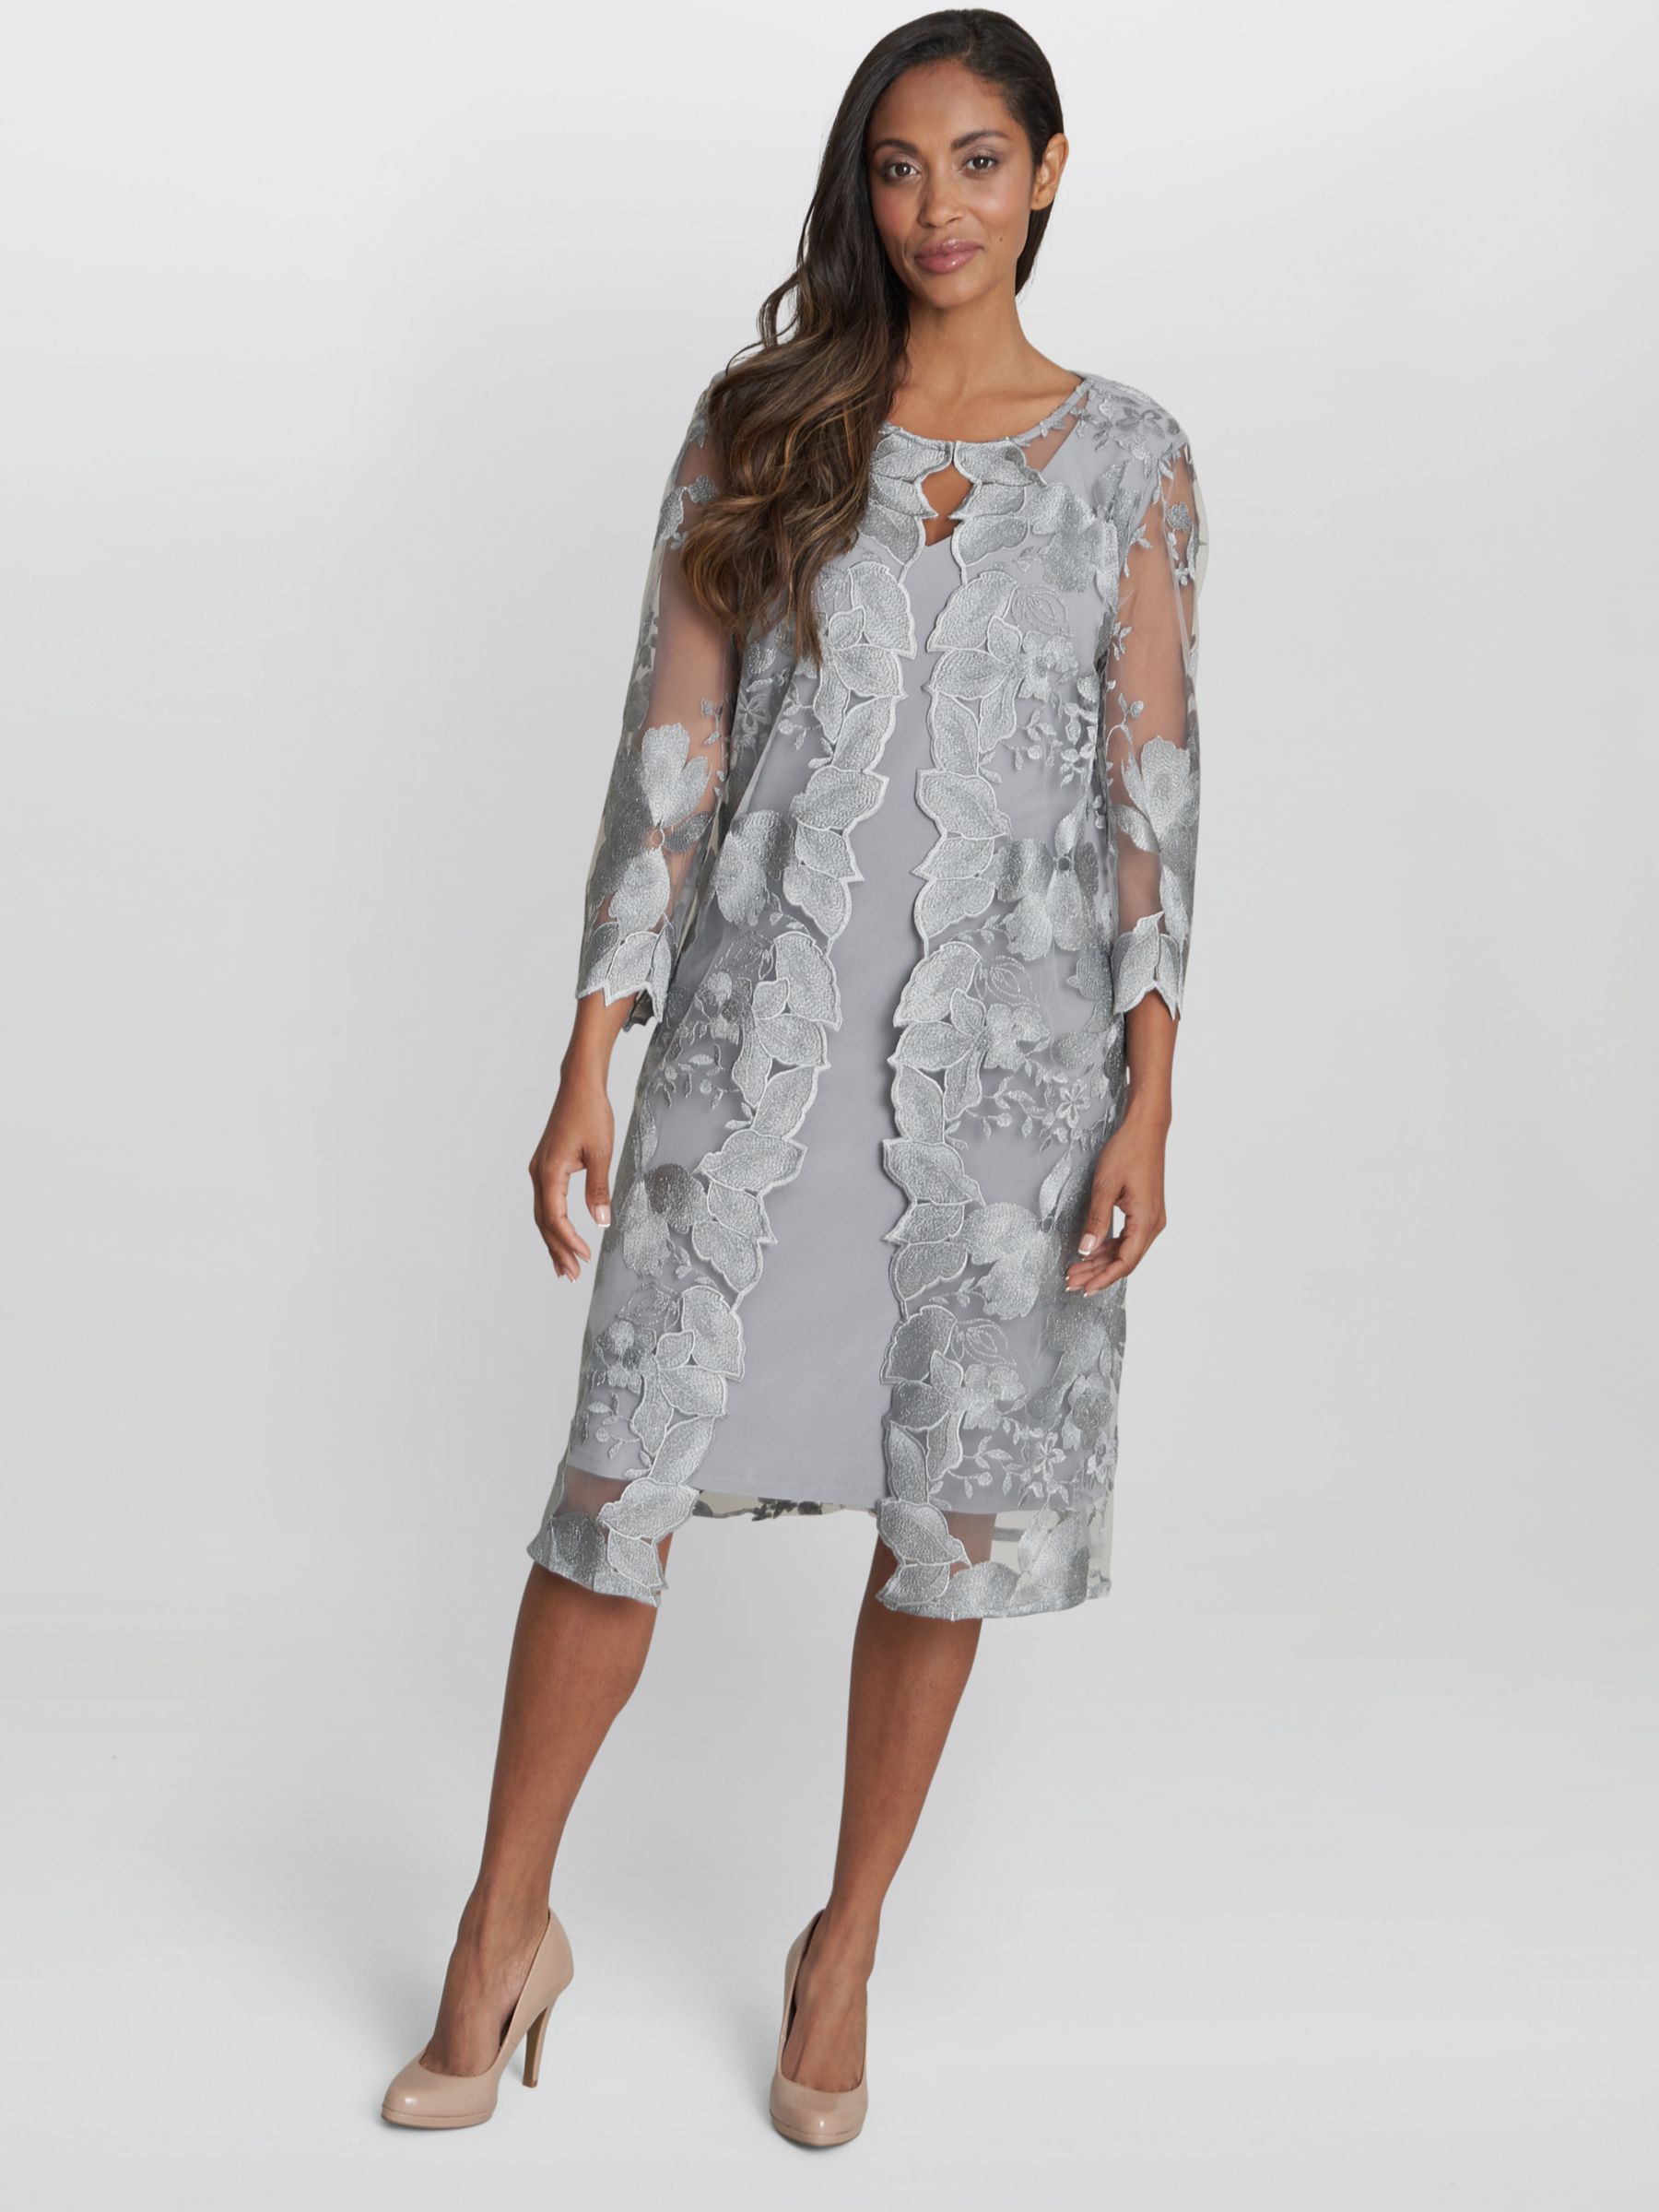 Gina Bacconi Savoy Floral Embroidered Lace Mock Knee Length Dress